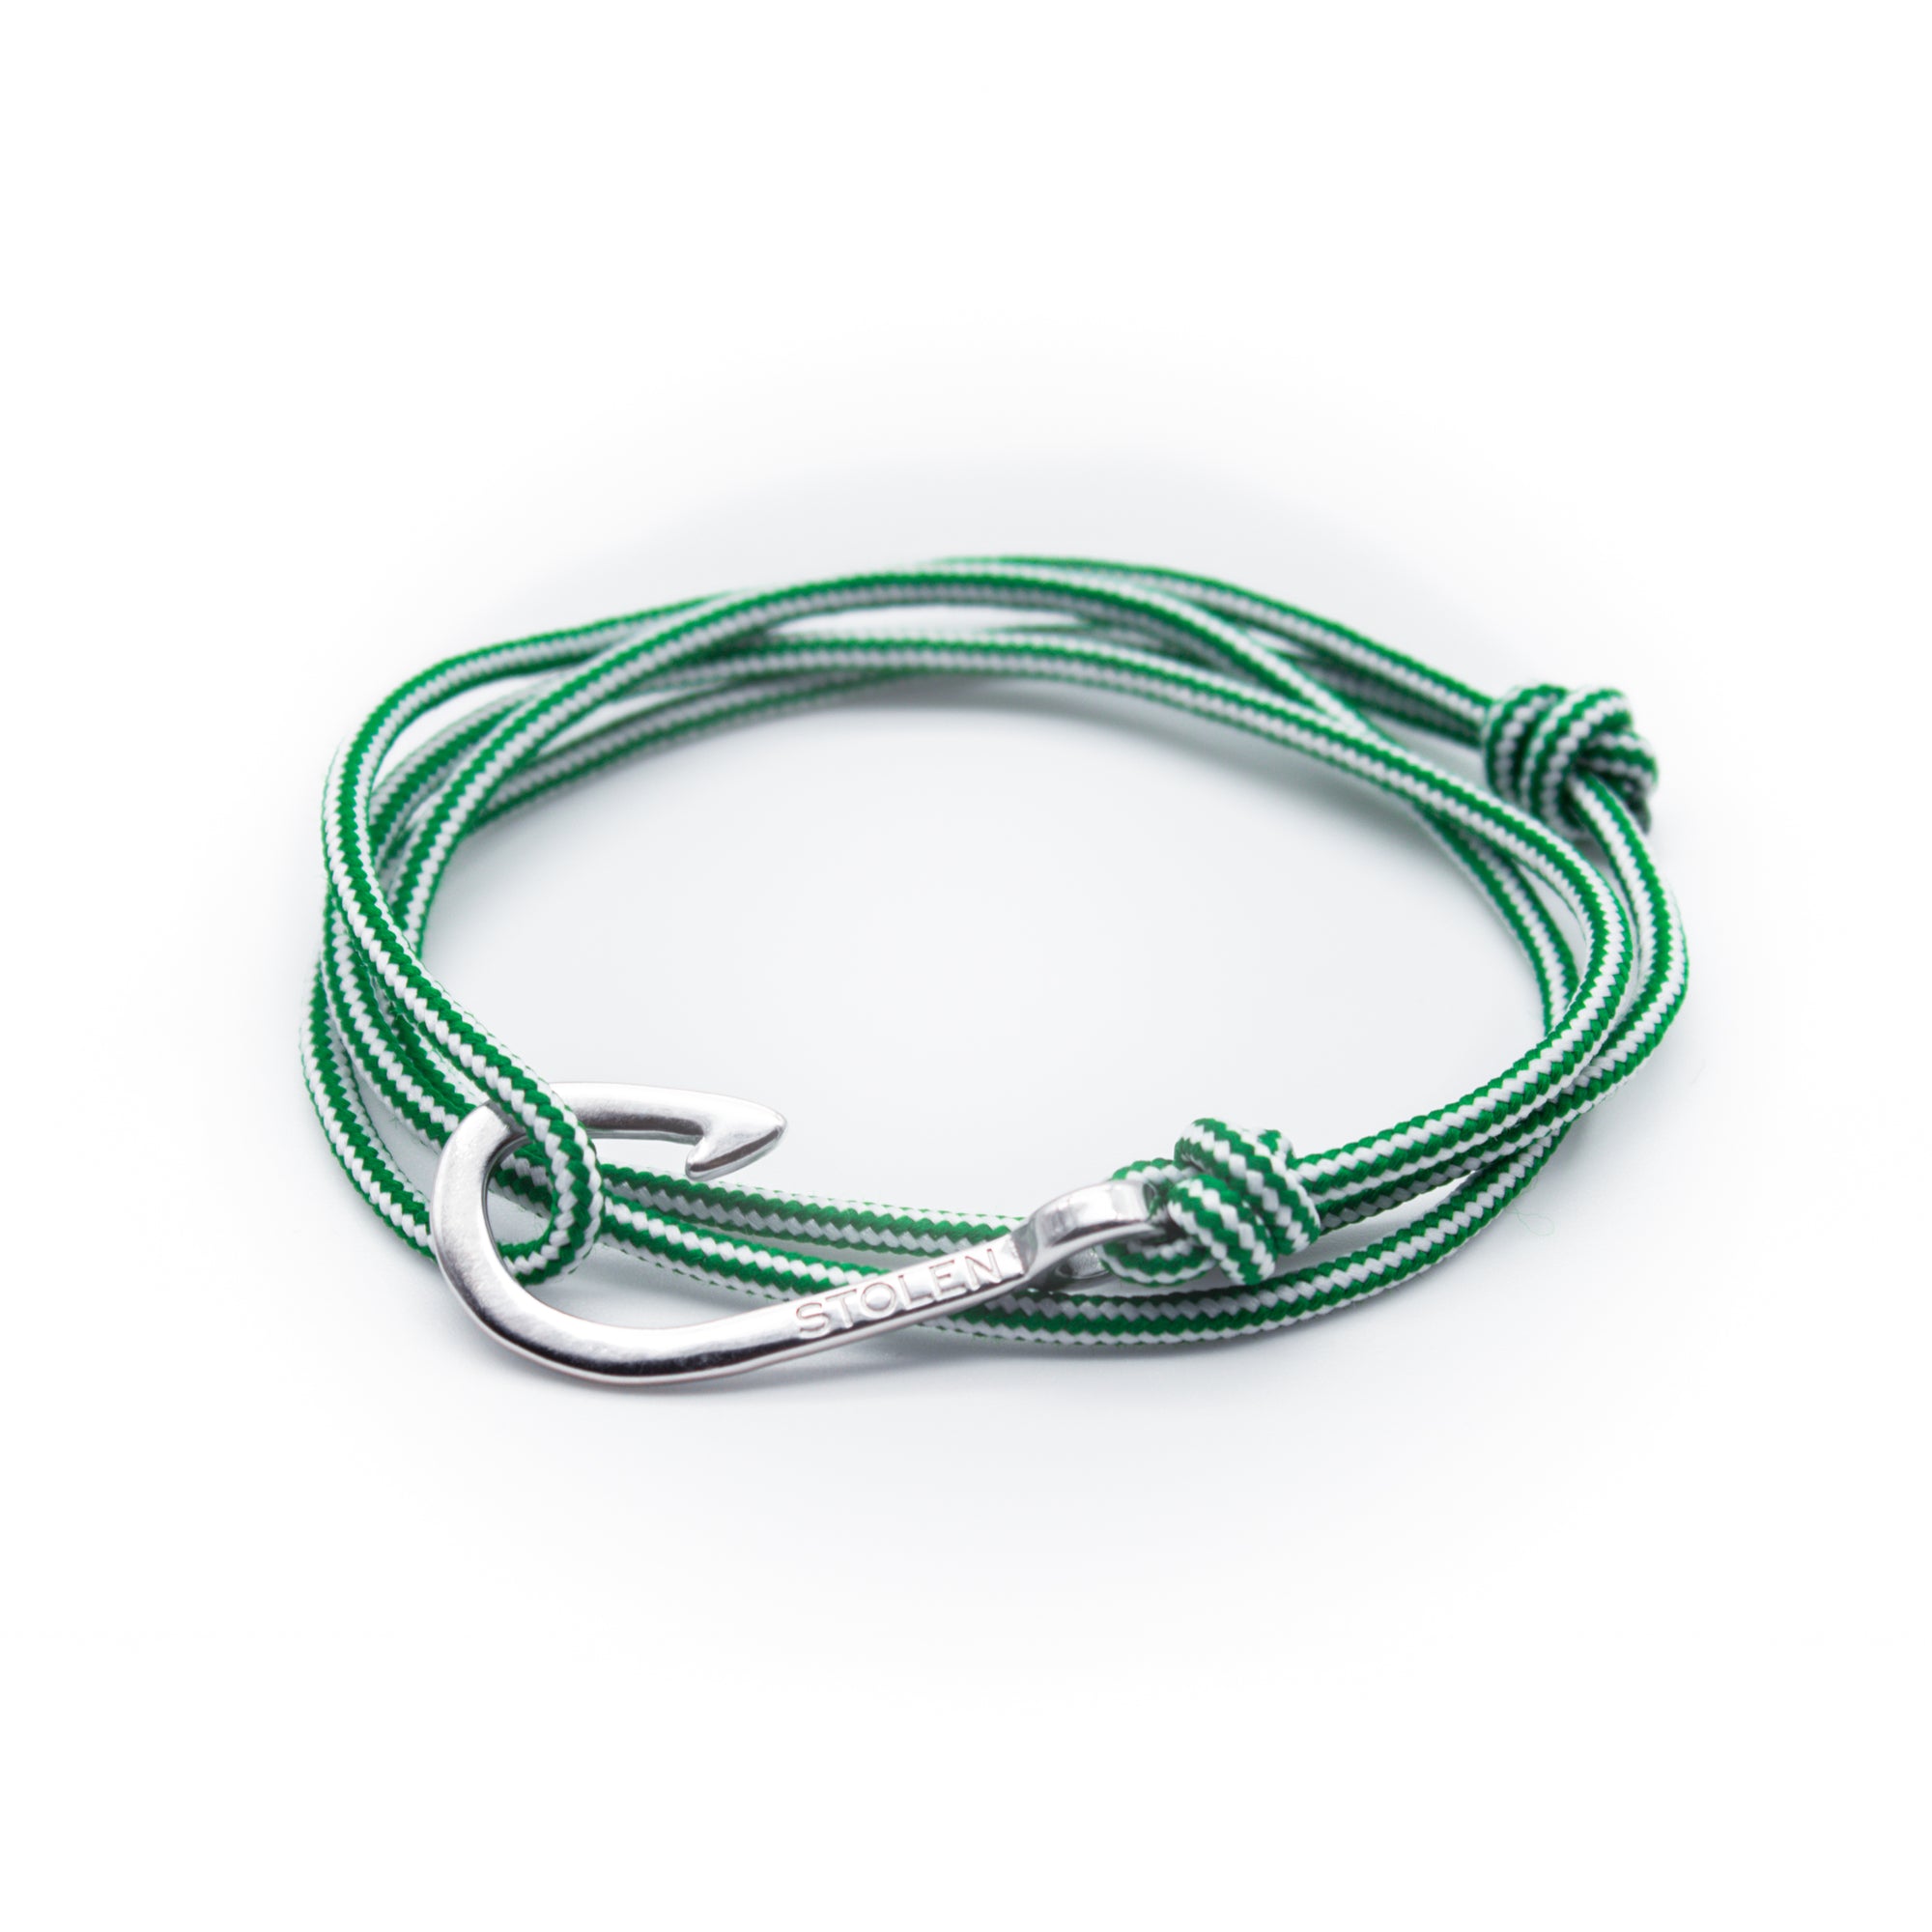 Green and White Stripe Men's Bracelet With Silver Hook - Stolen Riches